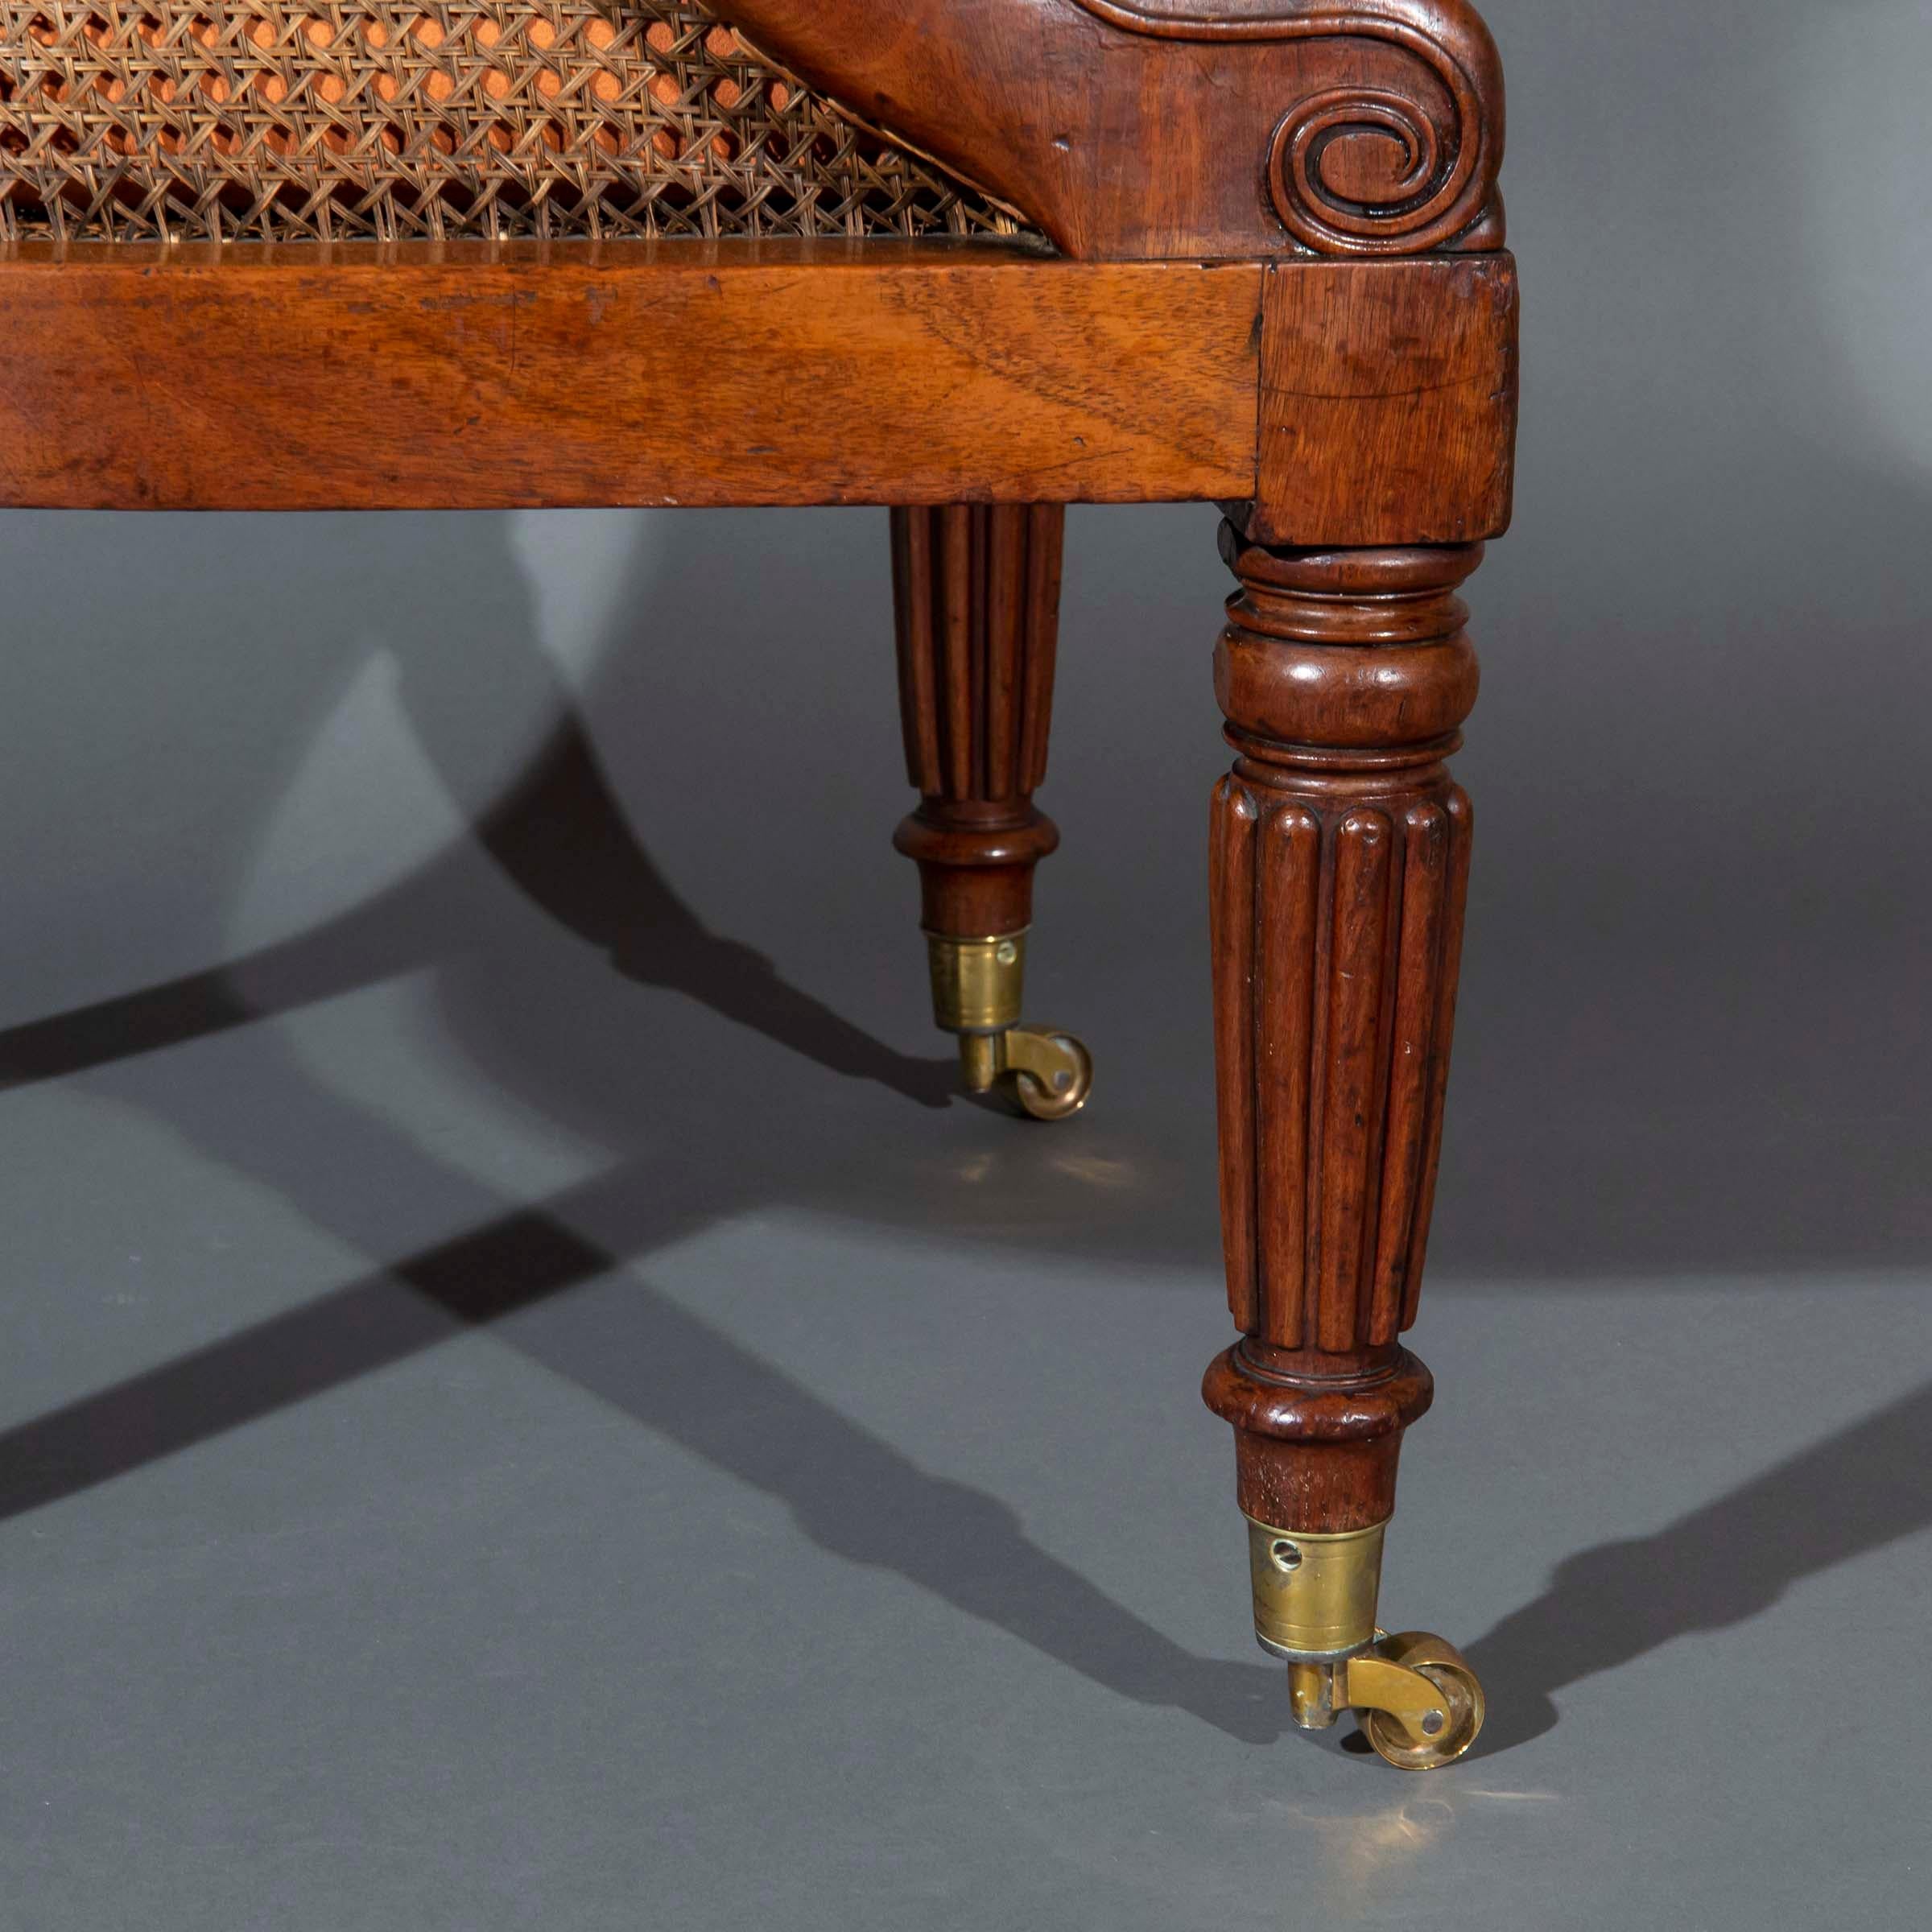 19th Century Pair of Regency Bergère Armchairs in the manner of Gillows